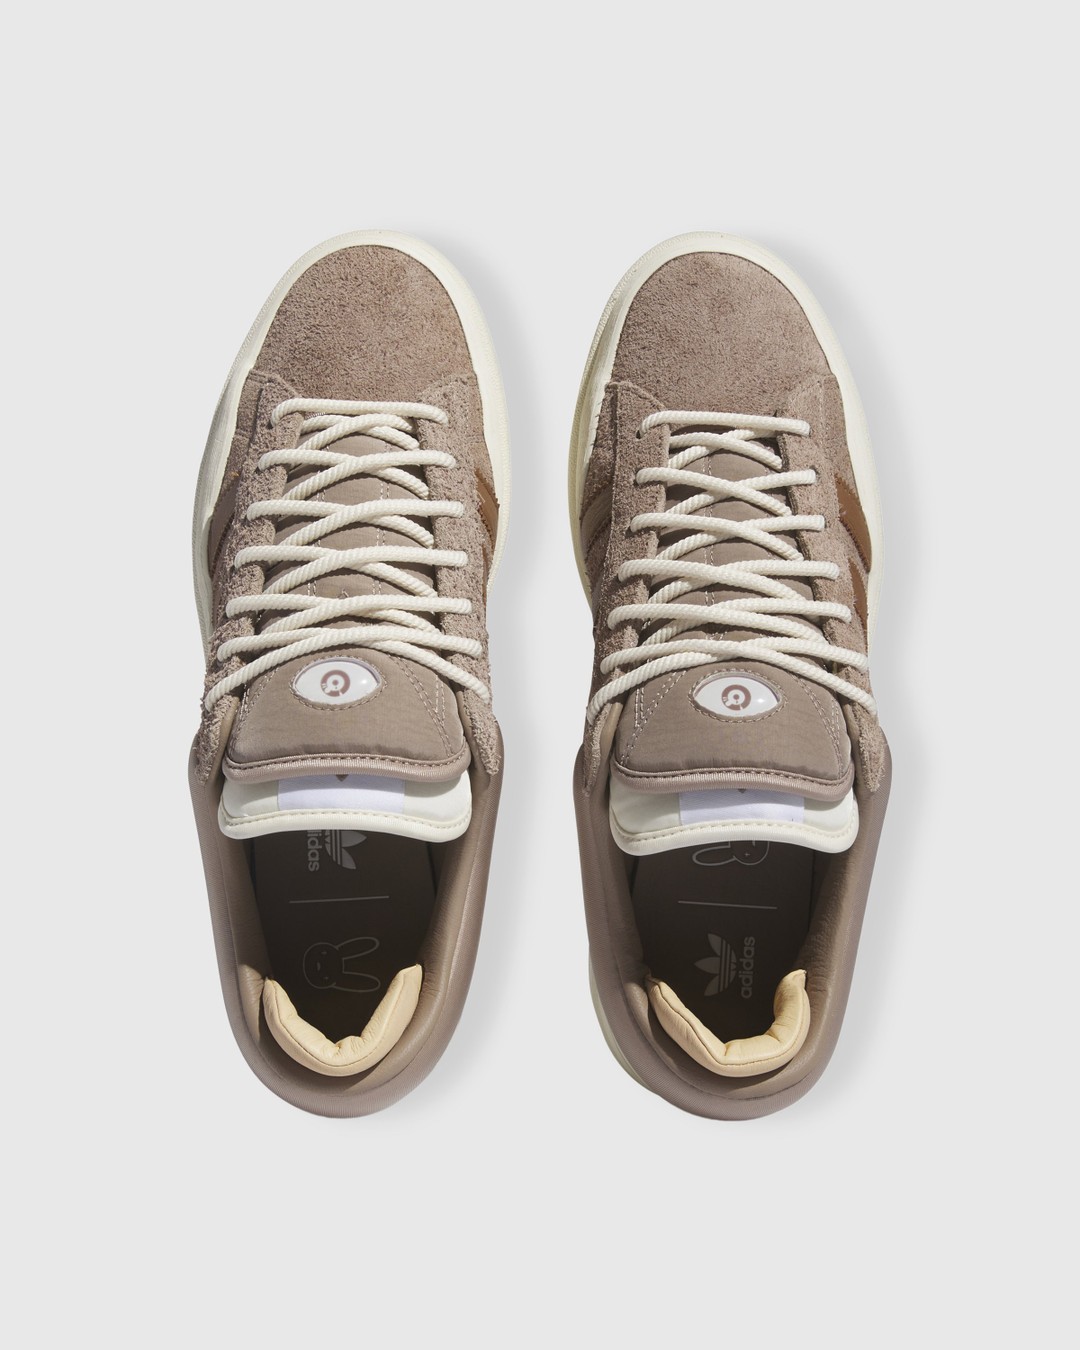 Adidas x Bad Bunny – Campus Chalky Brown - Sneakers - White - Image 4